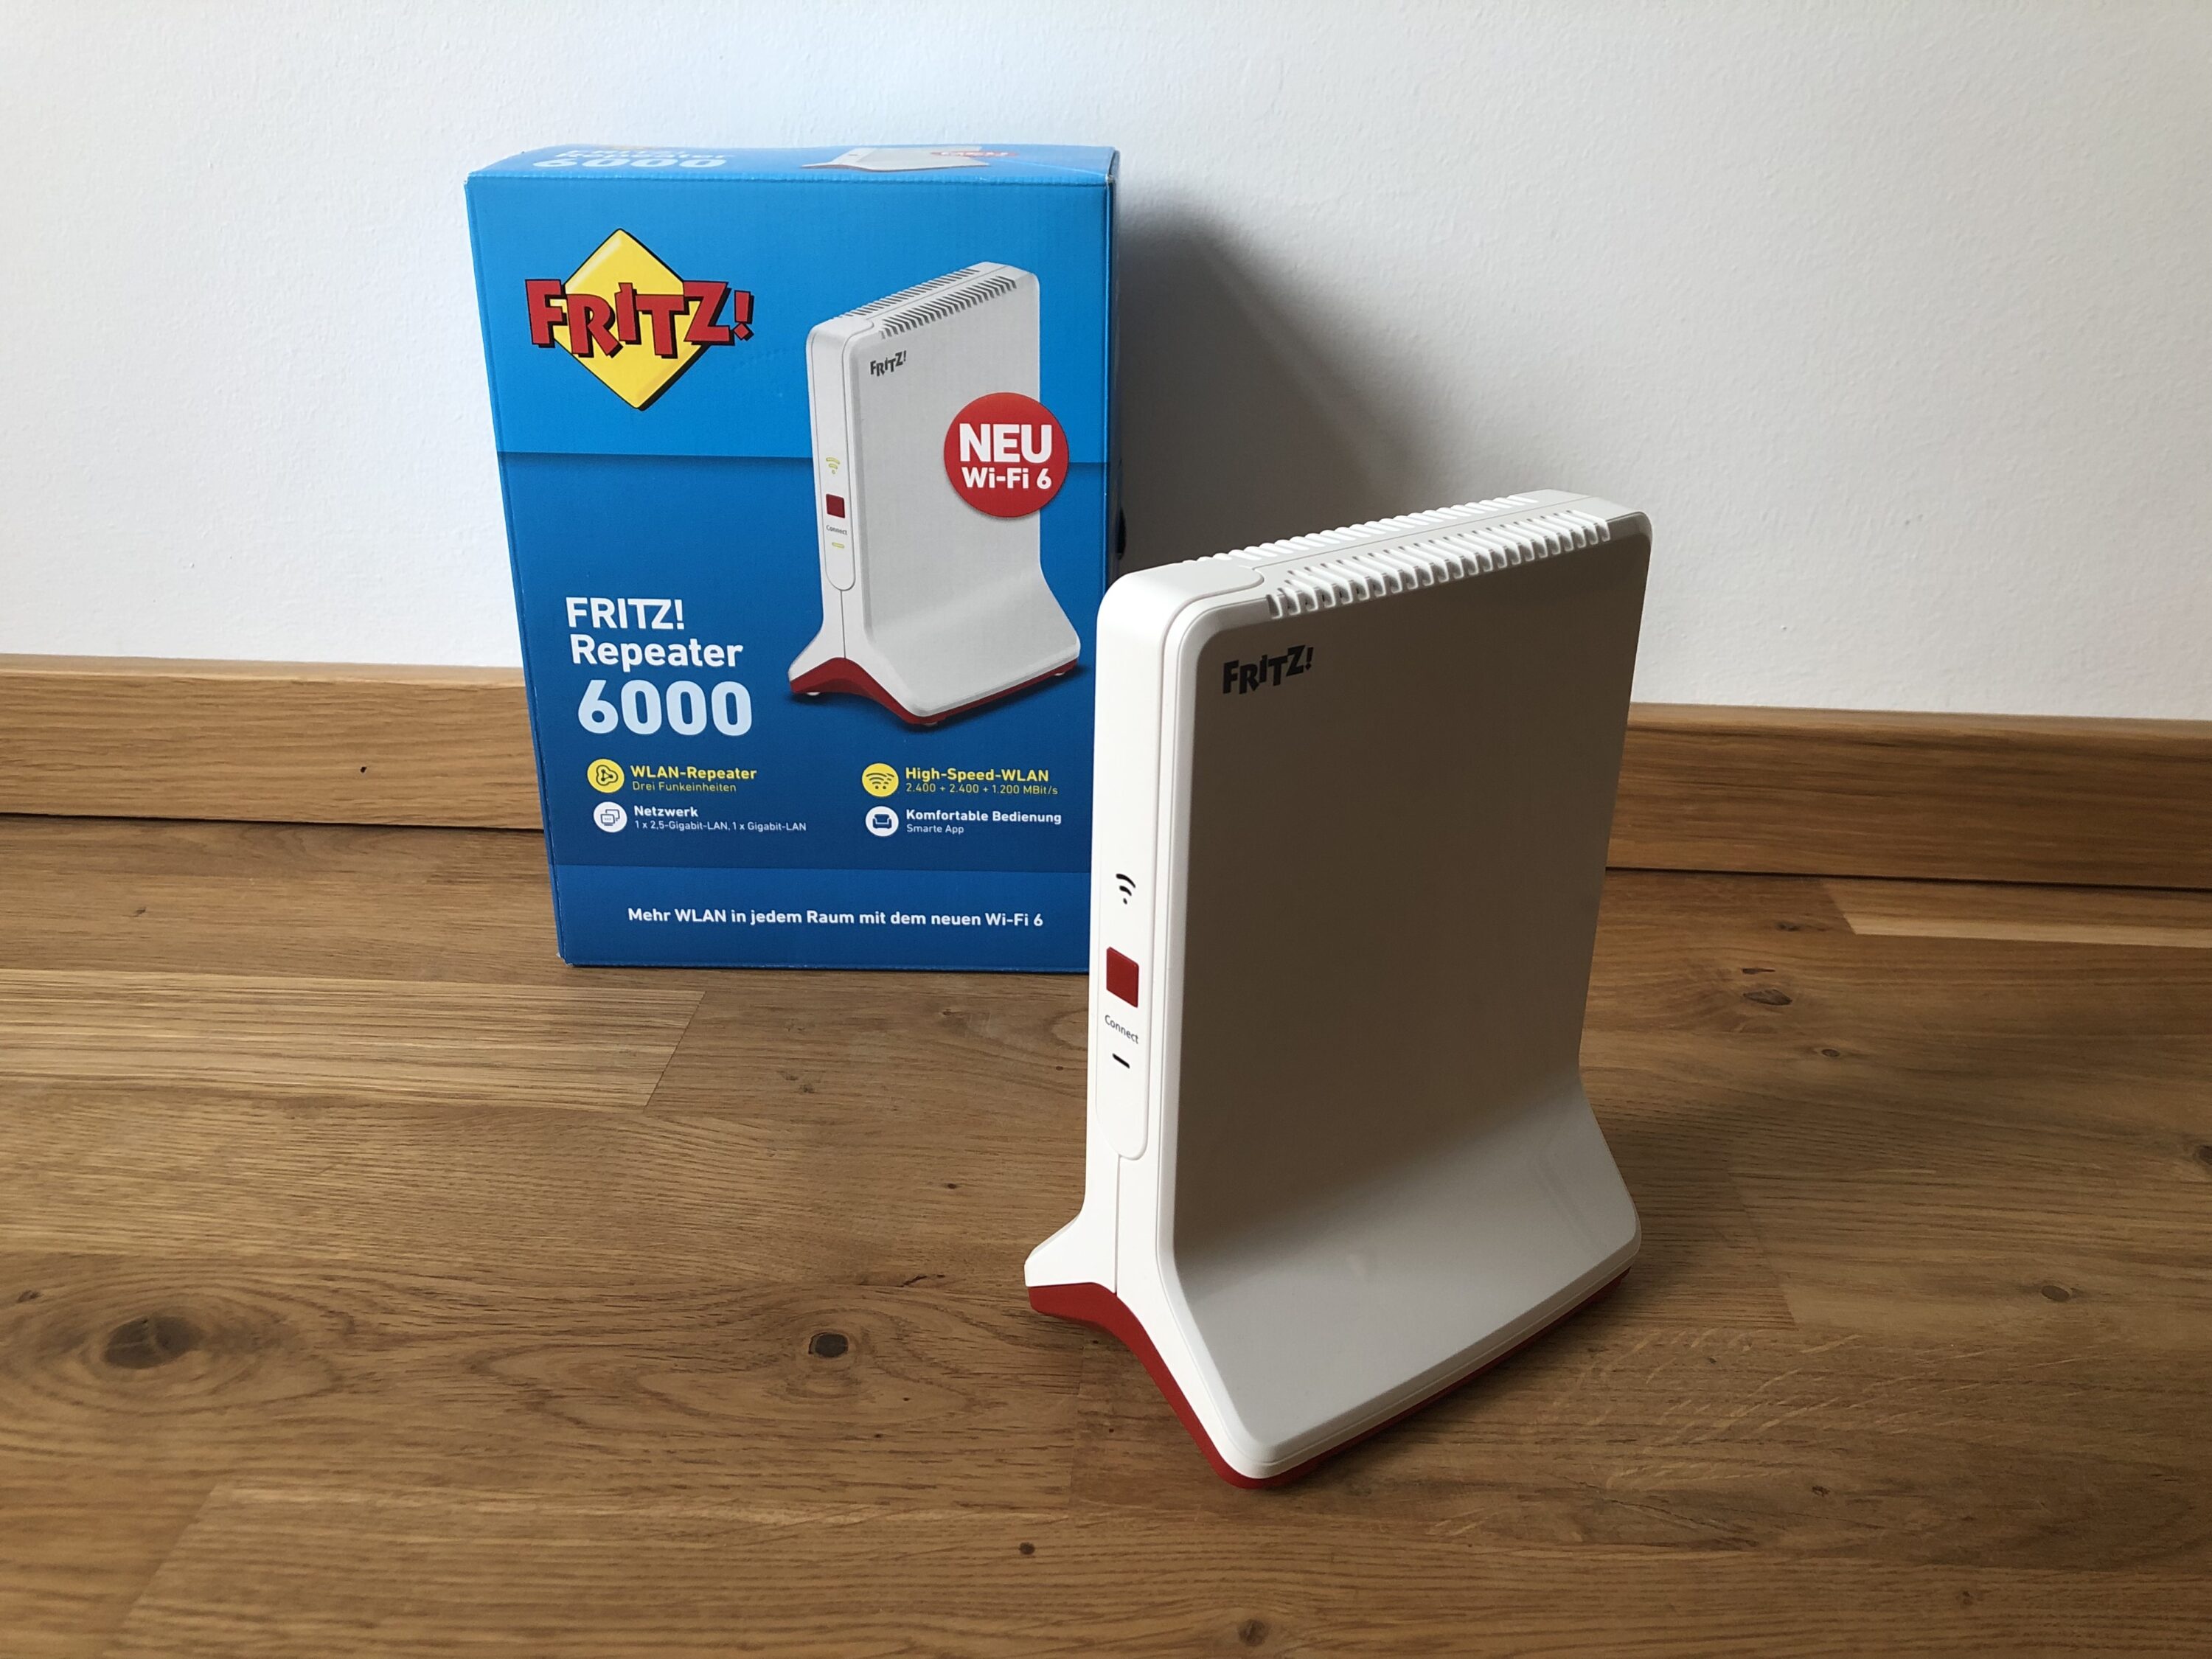 FRITZ!Repeater 6000 in test: Fast Internet everywhere at last?